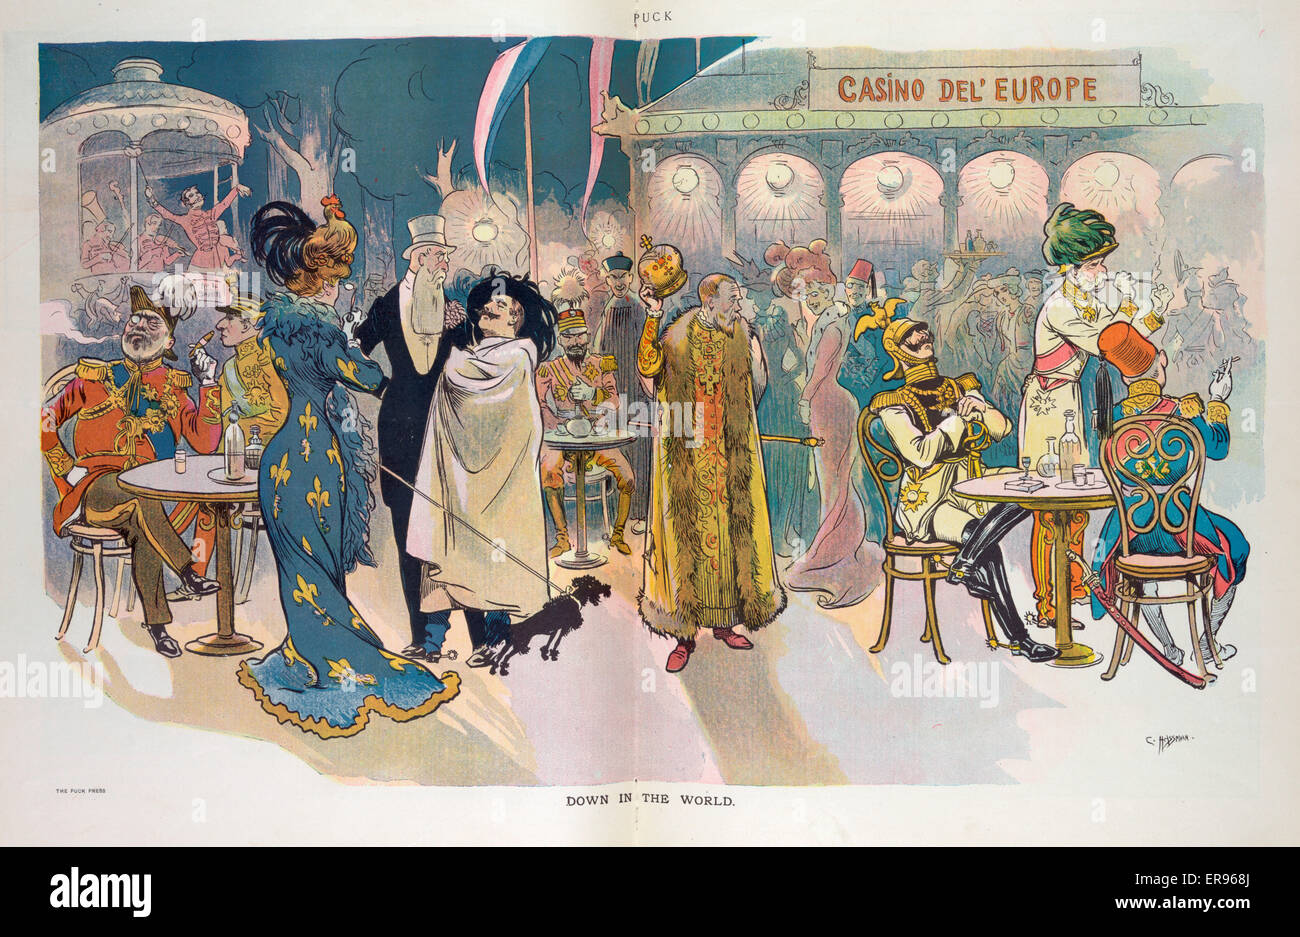 Down in the world. Illustration shows European leaders from England, France, Italy, Japan, Russia, Germany, Austria, and Turkey, among the crowd enjoying the entertainments at the Casino Del' Europe. Date 1906 November 28. Down in the world. Illustration Stock Photo